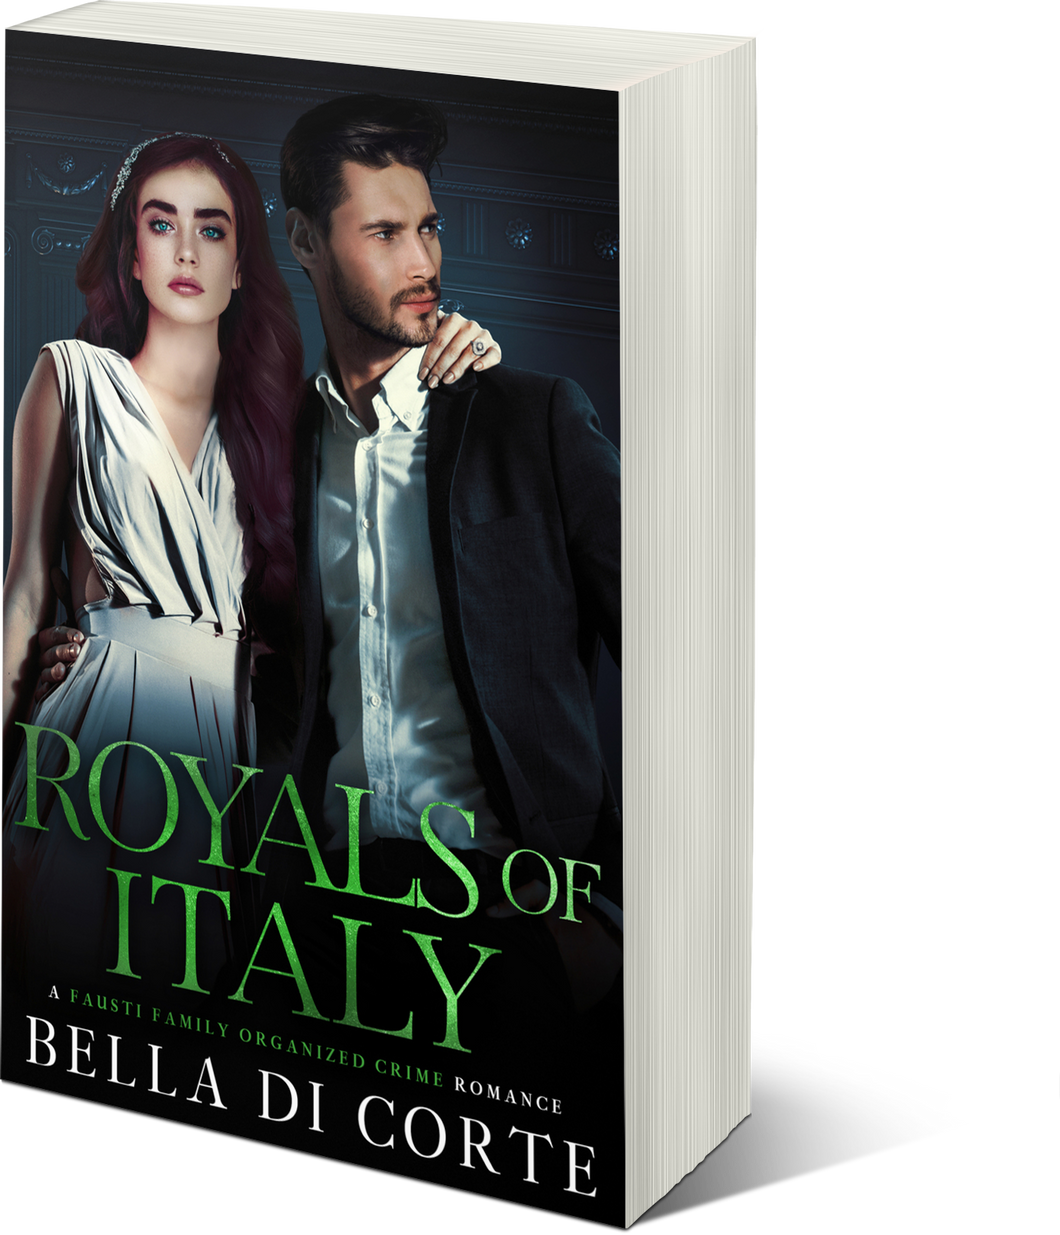 Royals of Italy, (The Fausti Family, Book Three)